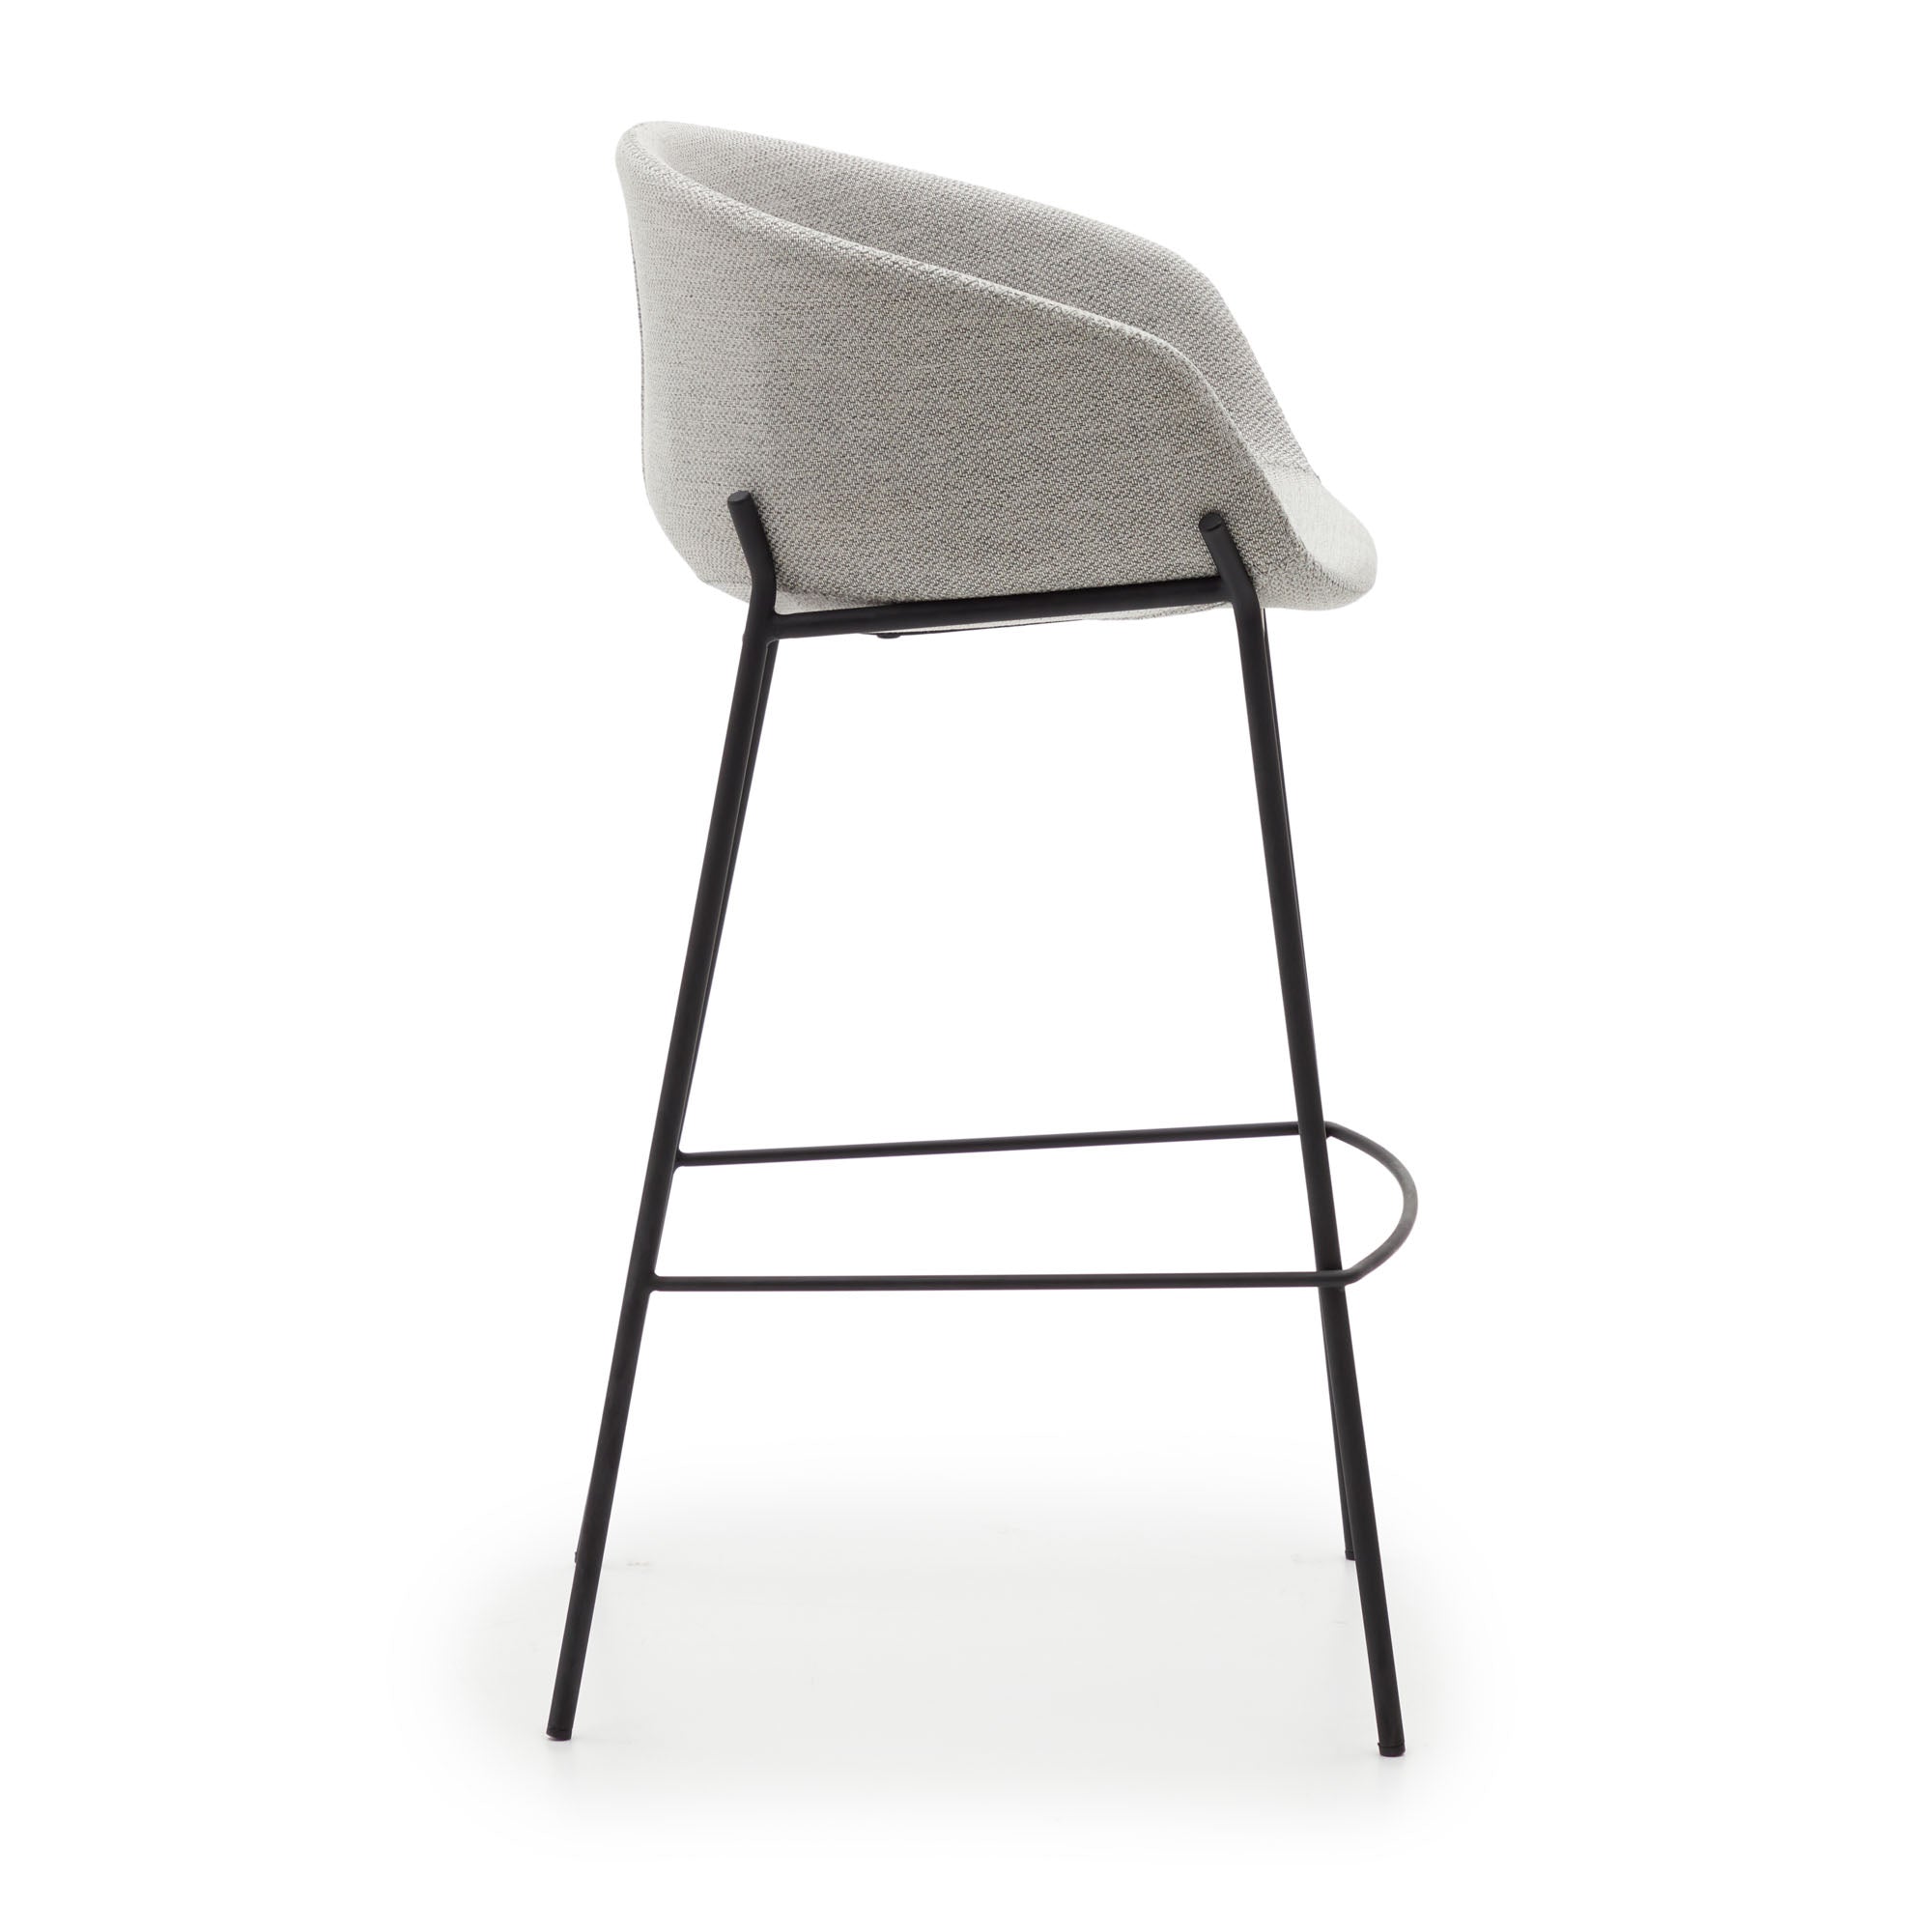 Yvette light grey stool with steel in a black finish, height 74 cm